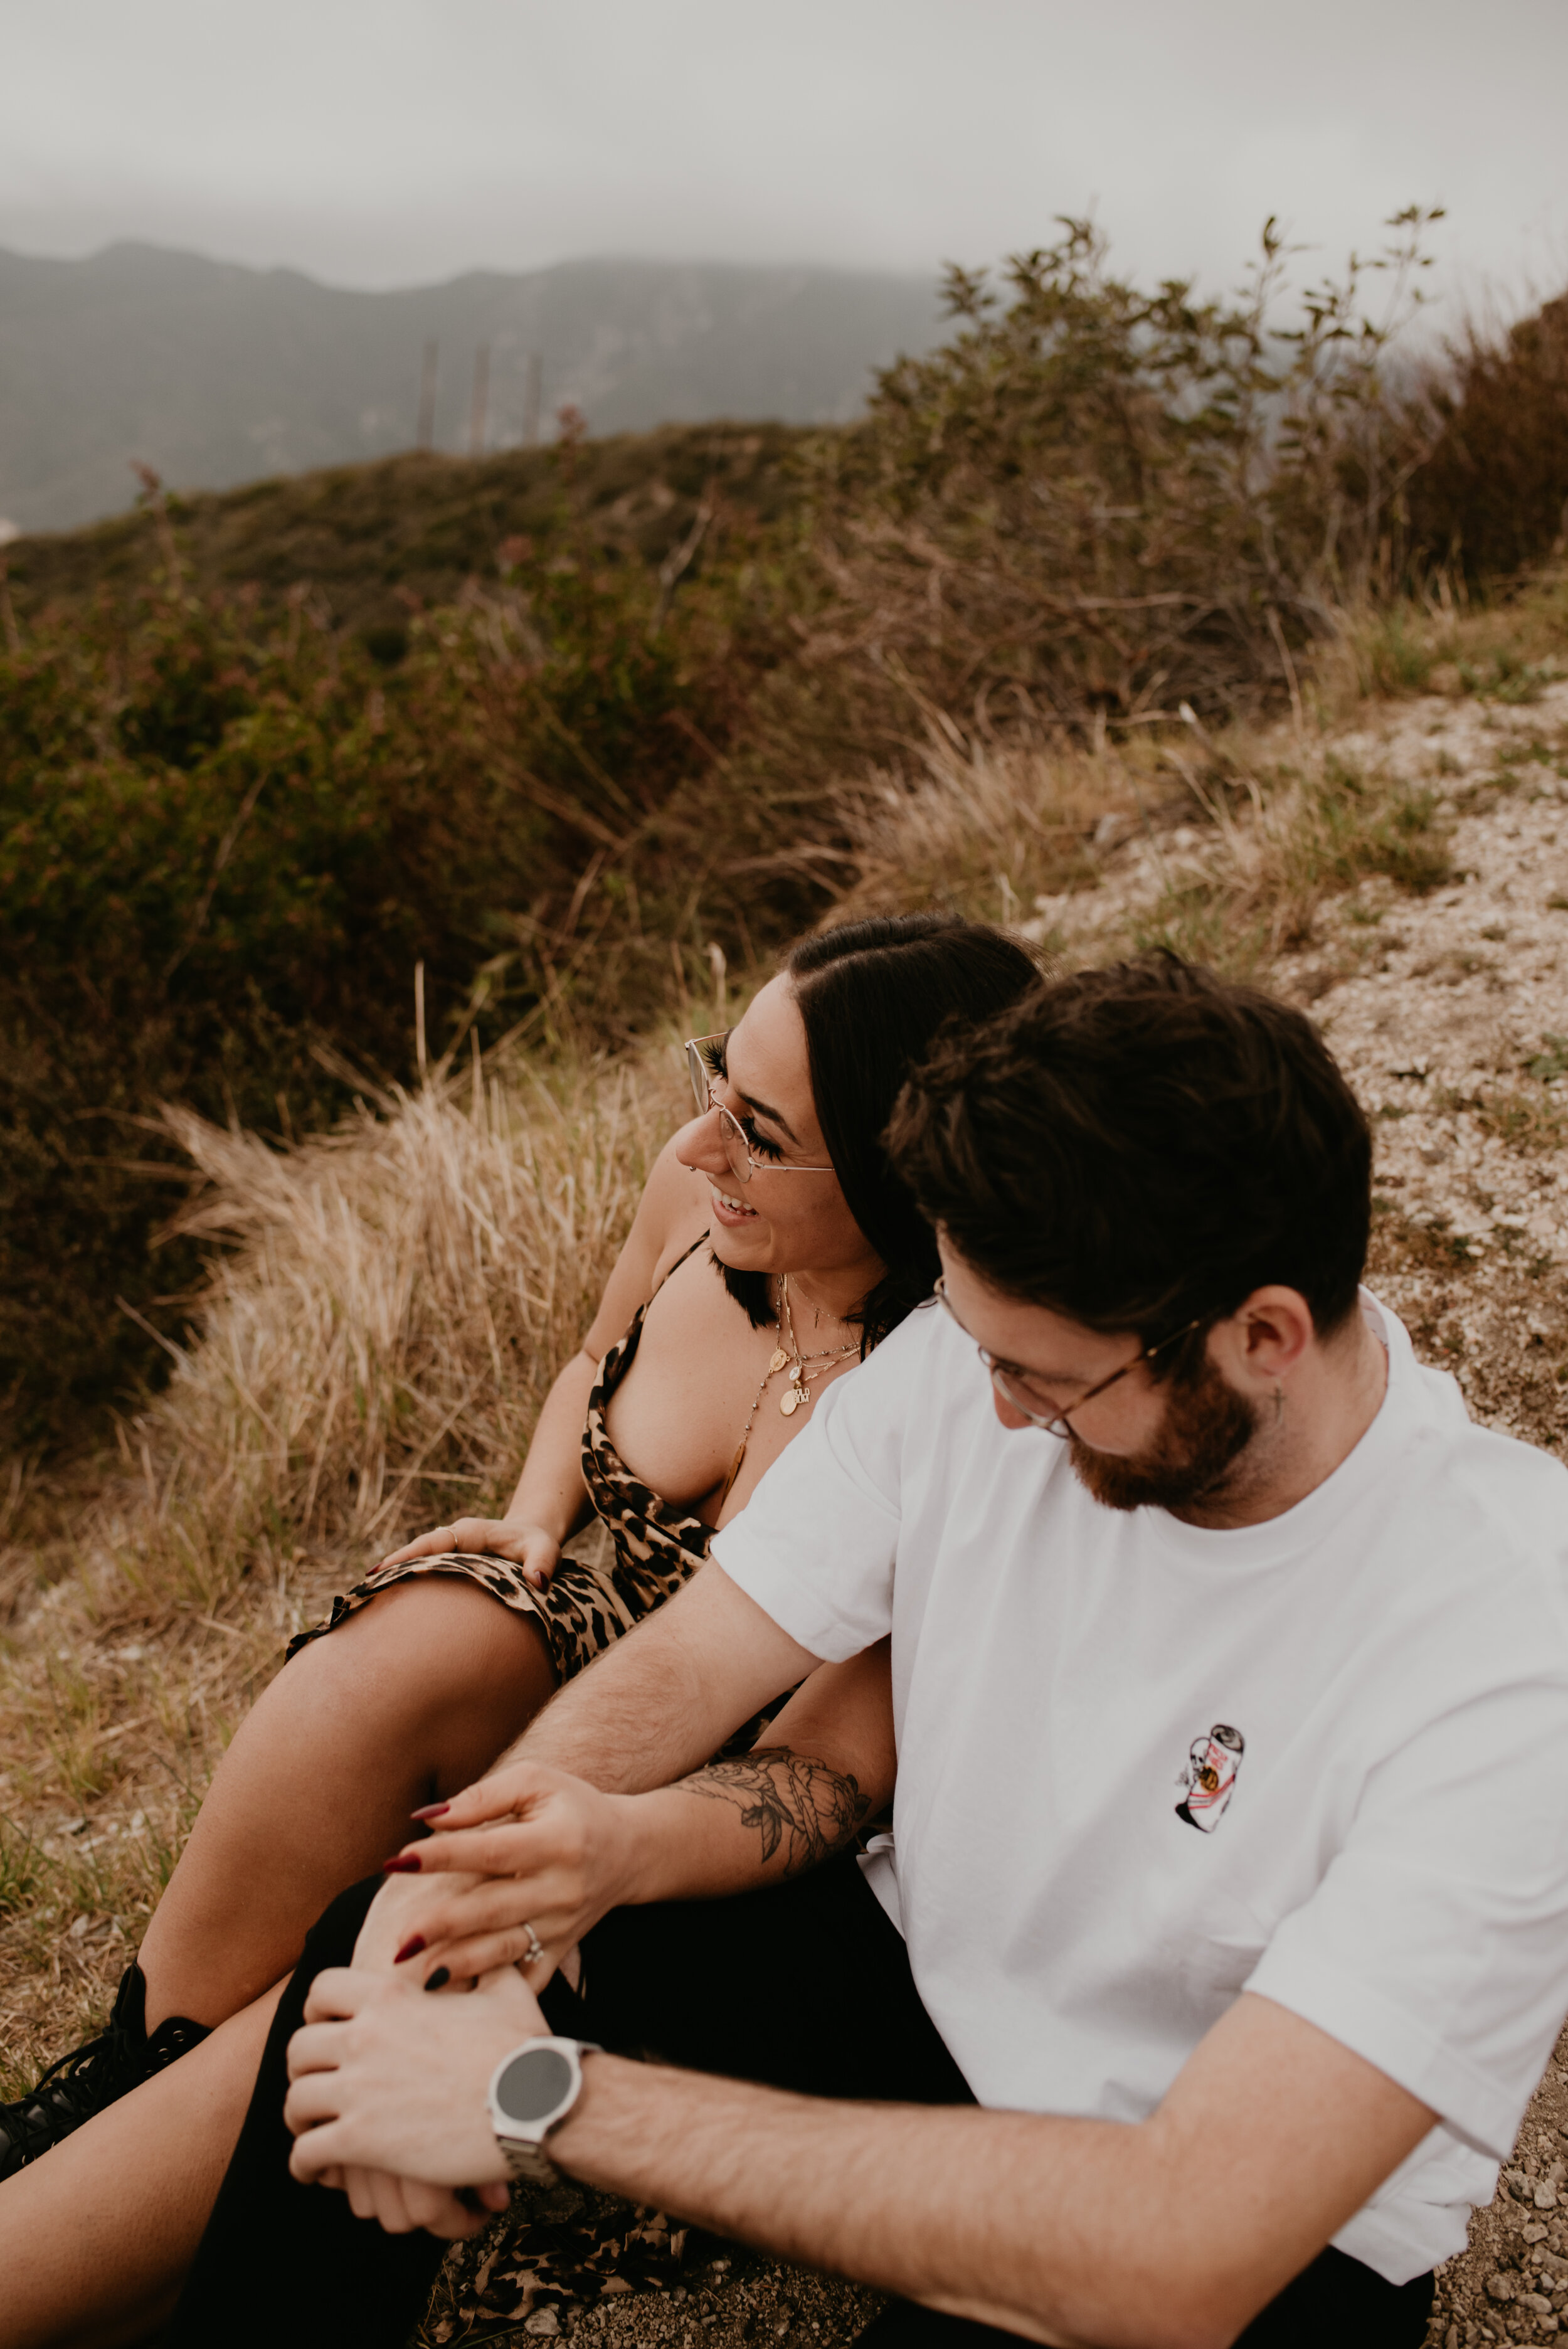 Los Angeles Mountain Engagement Session | Angeles National Forest Engagement Photos | California Wedding Photographer | Engagement Session with Jeep | Los Angeles Wedding Photographer